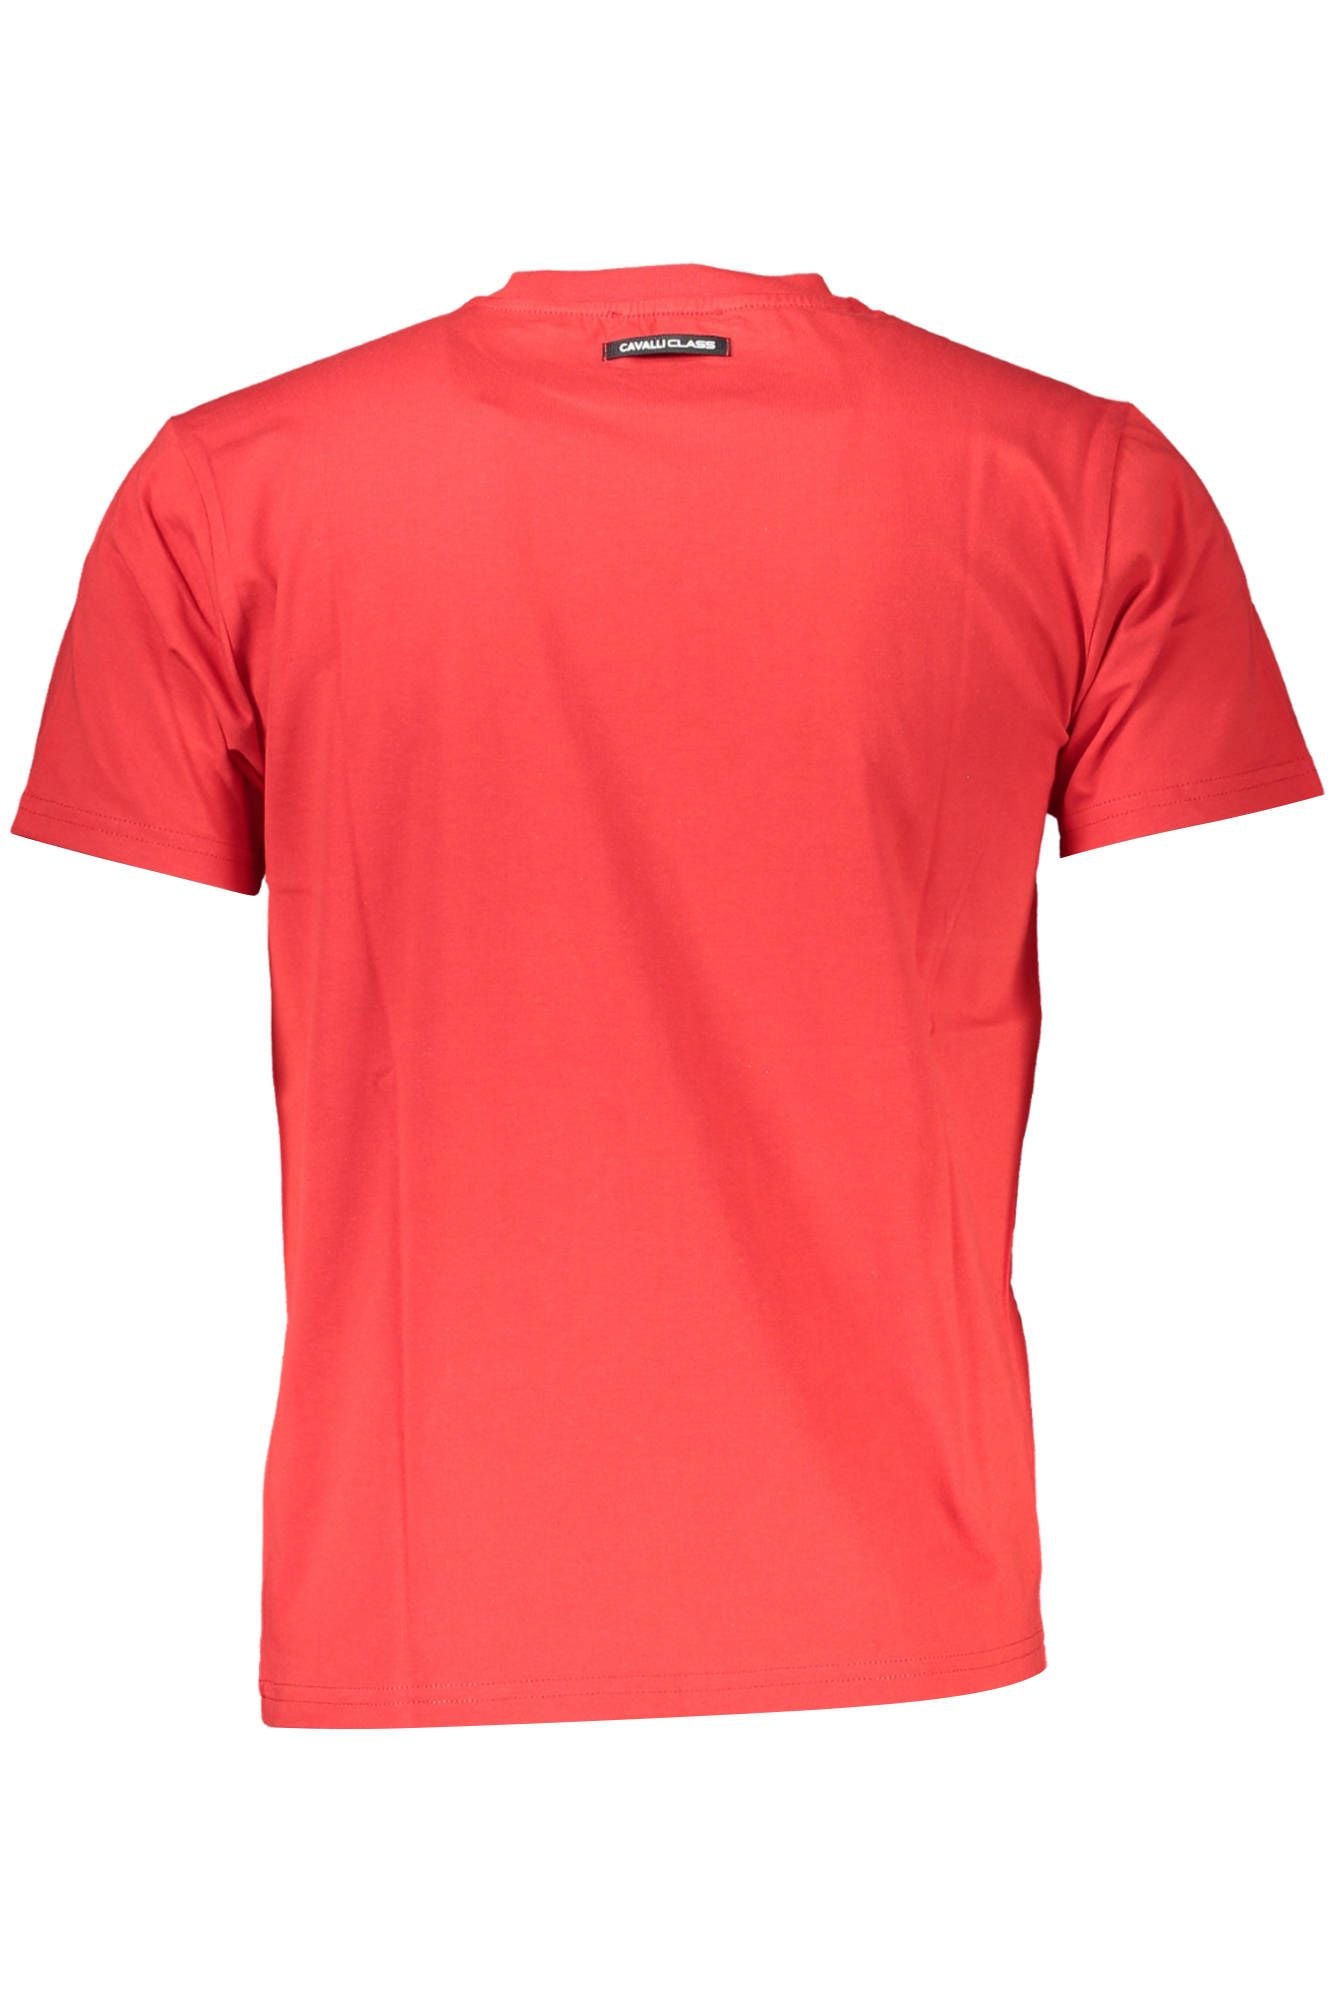 Cavalli Class Chic Red Round Neck Cotton Tee with Signature Print